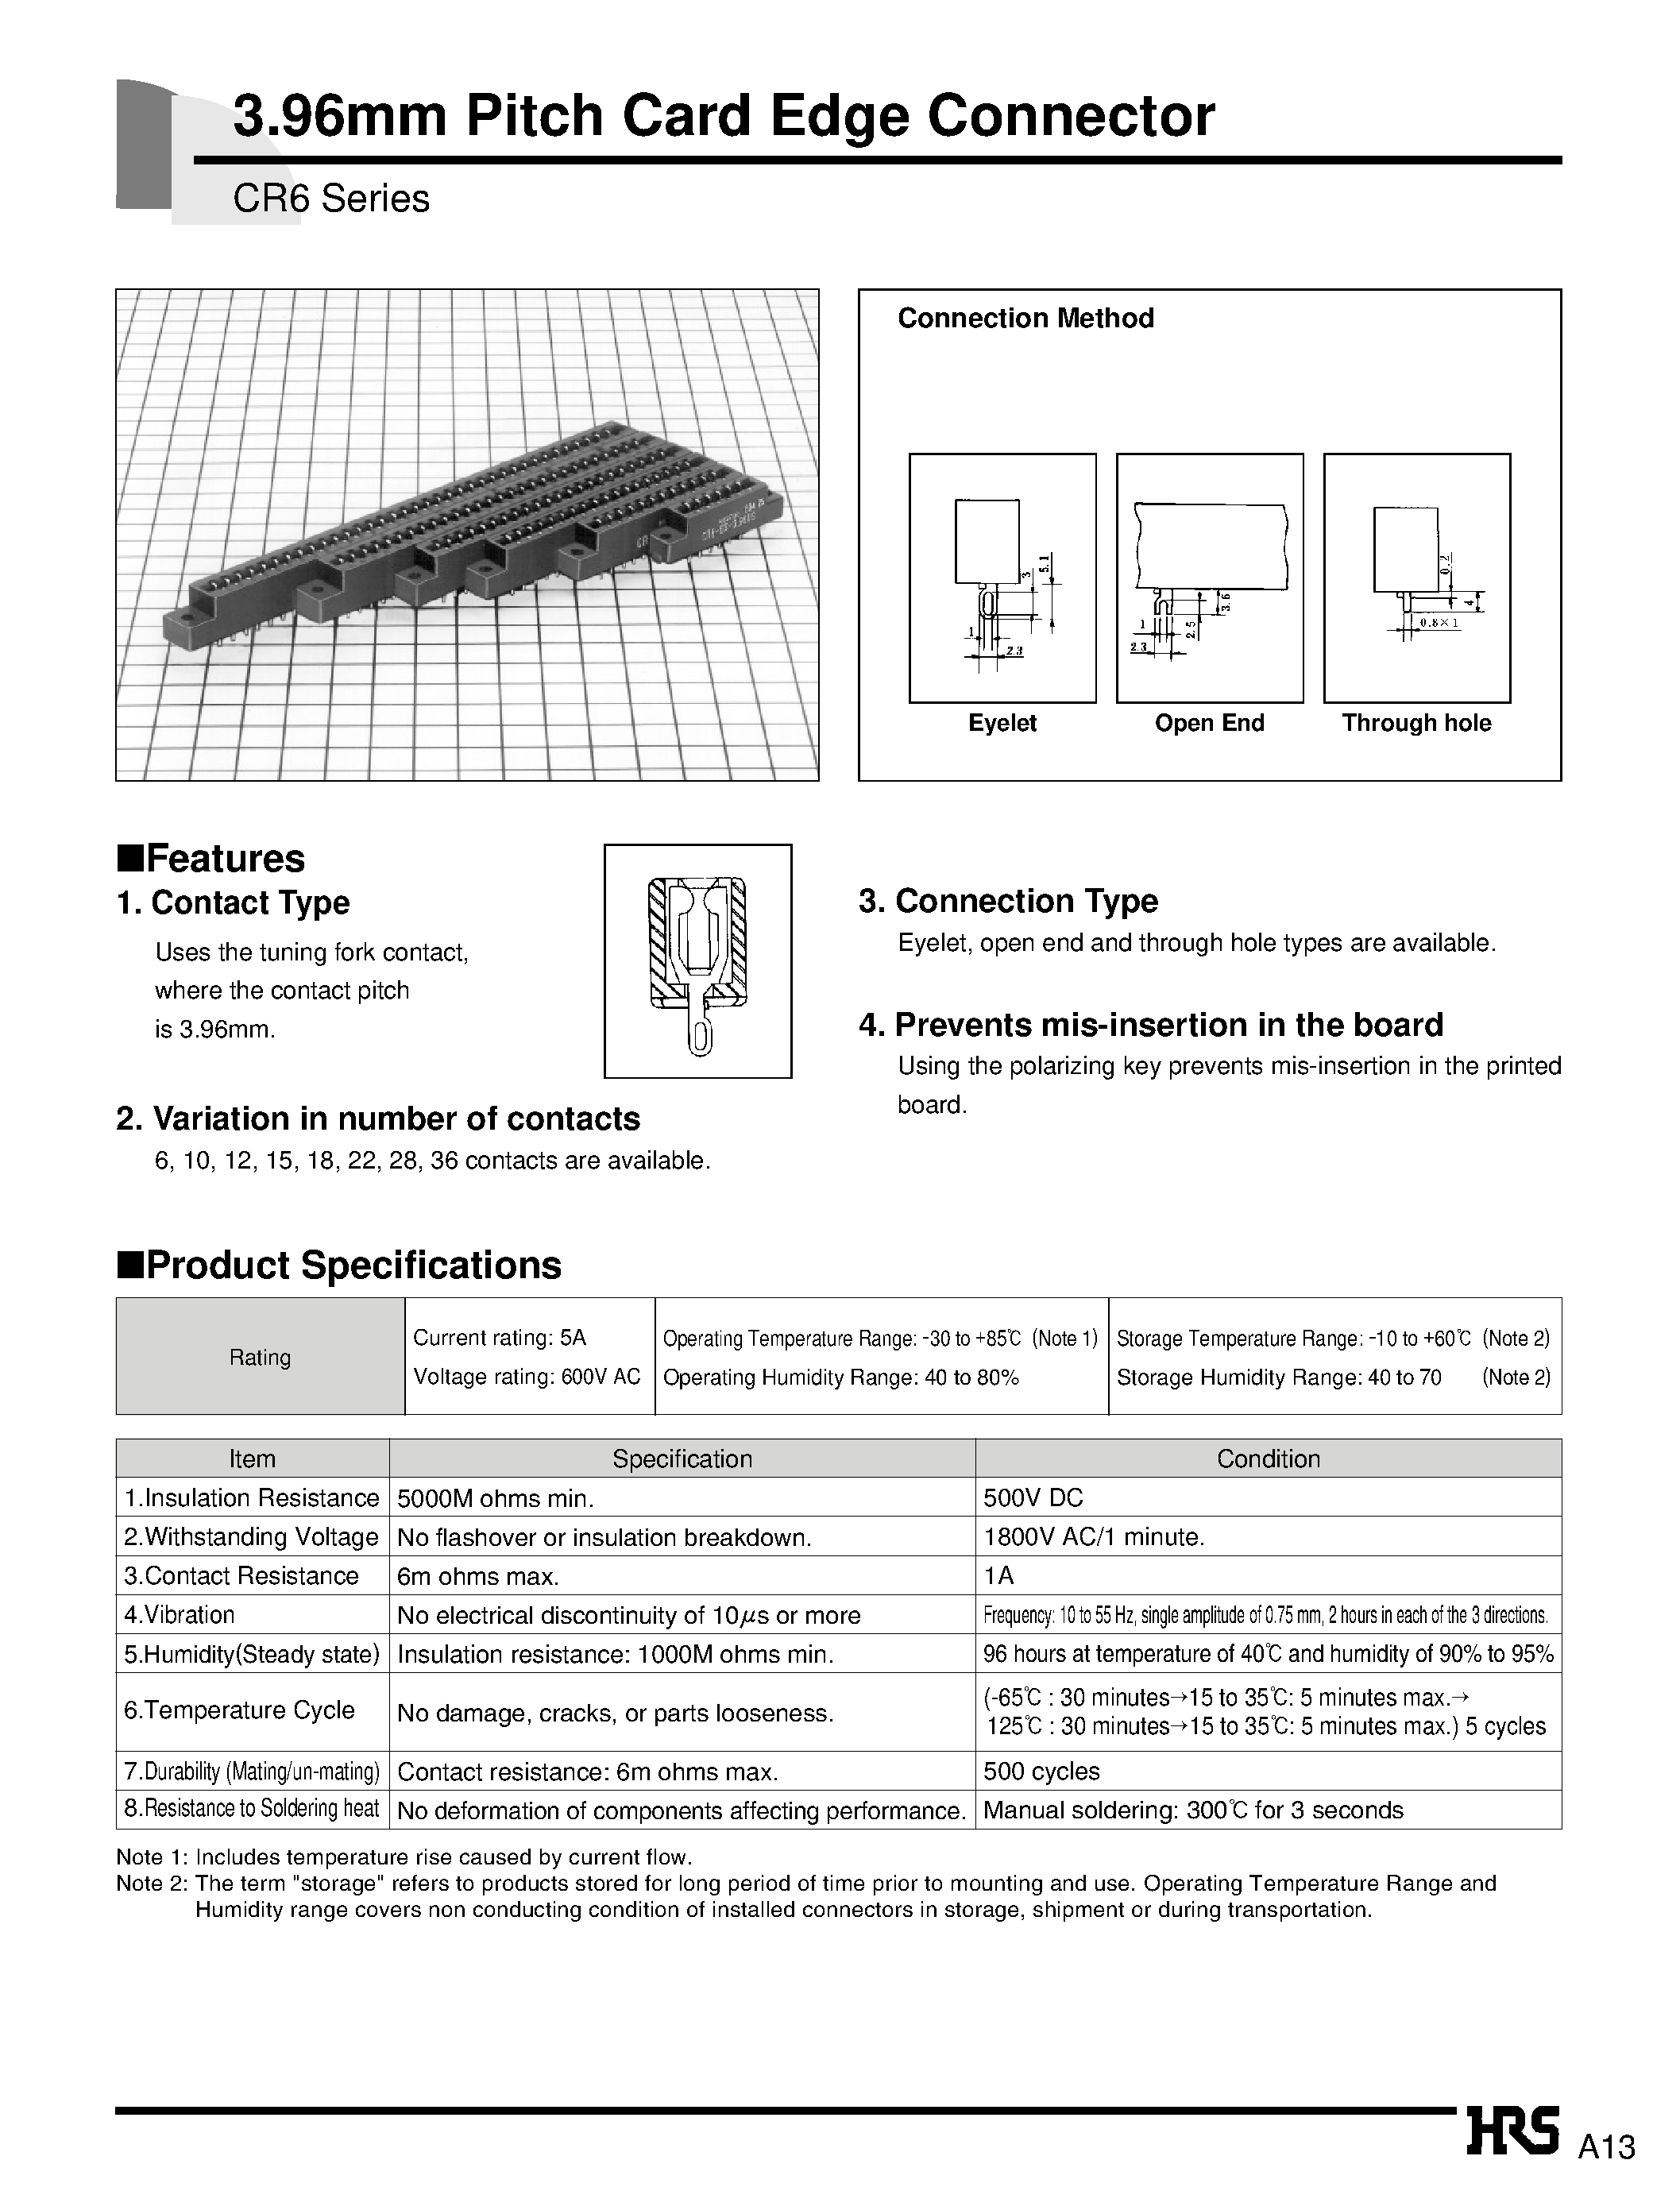 Datasheet CR6-18S-3.96OE - 3.96mm Pitch Card Edge Connector page 1